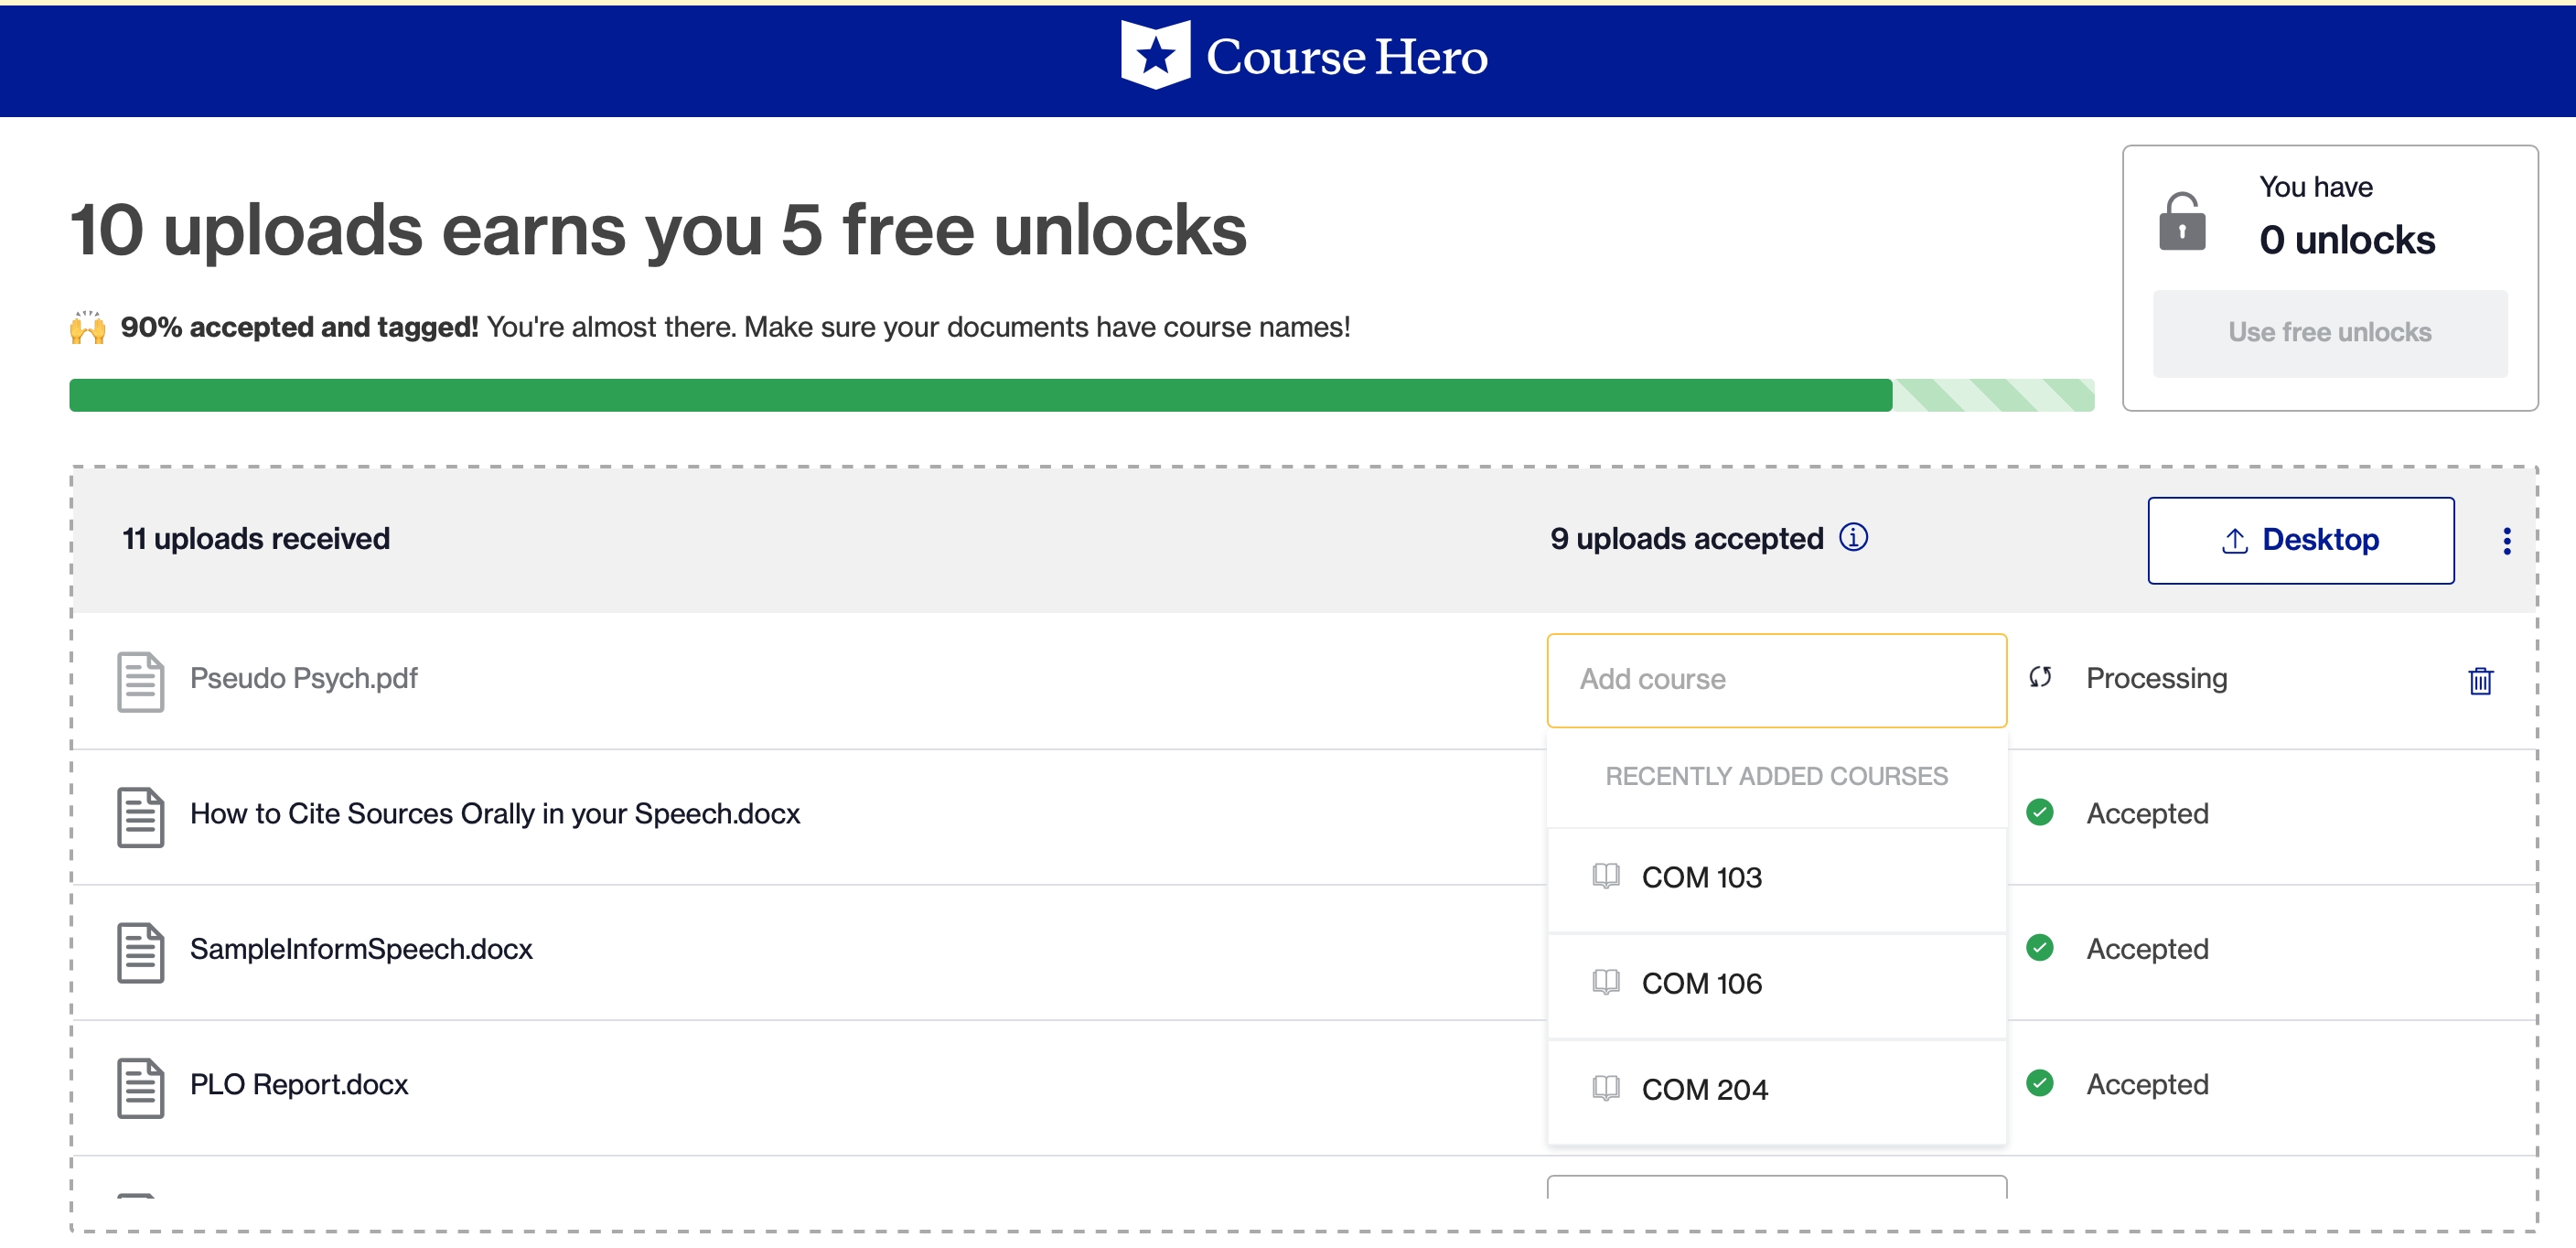 course hero login free 1 month trial